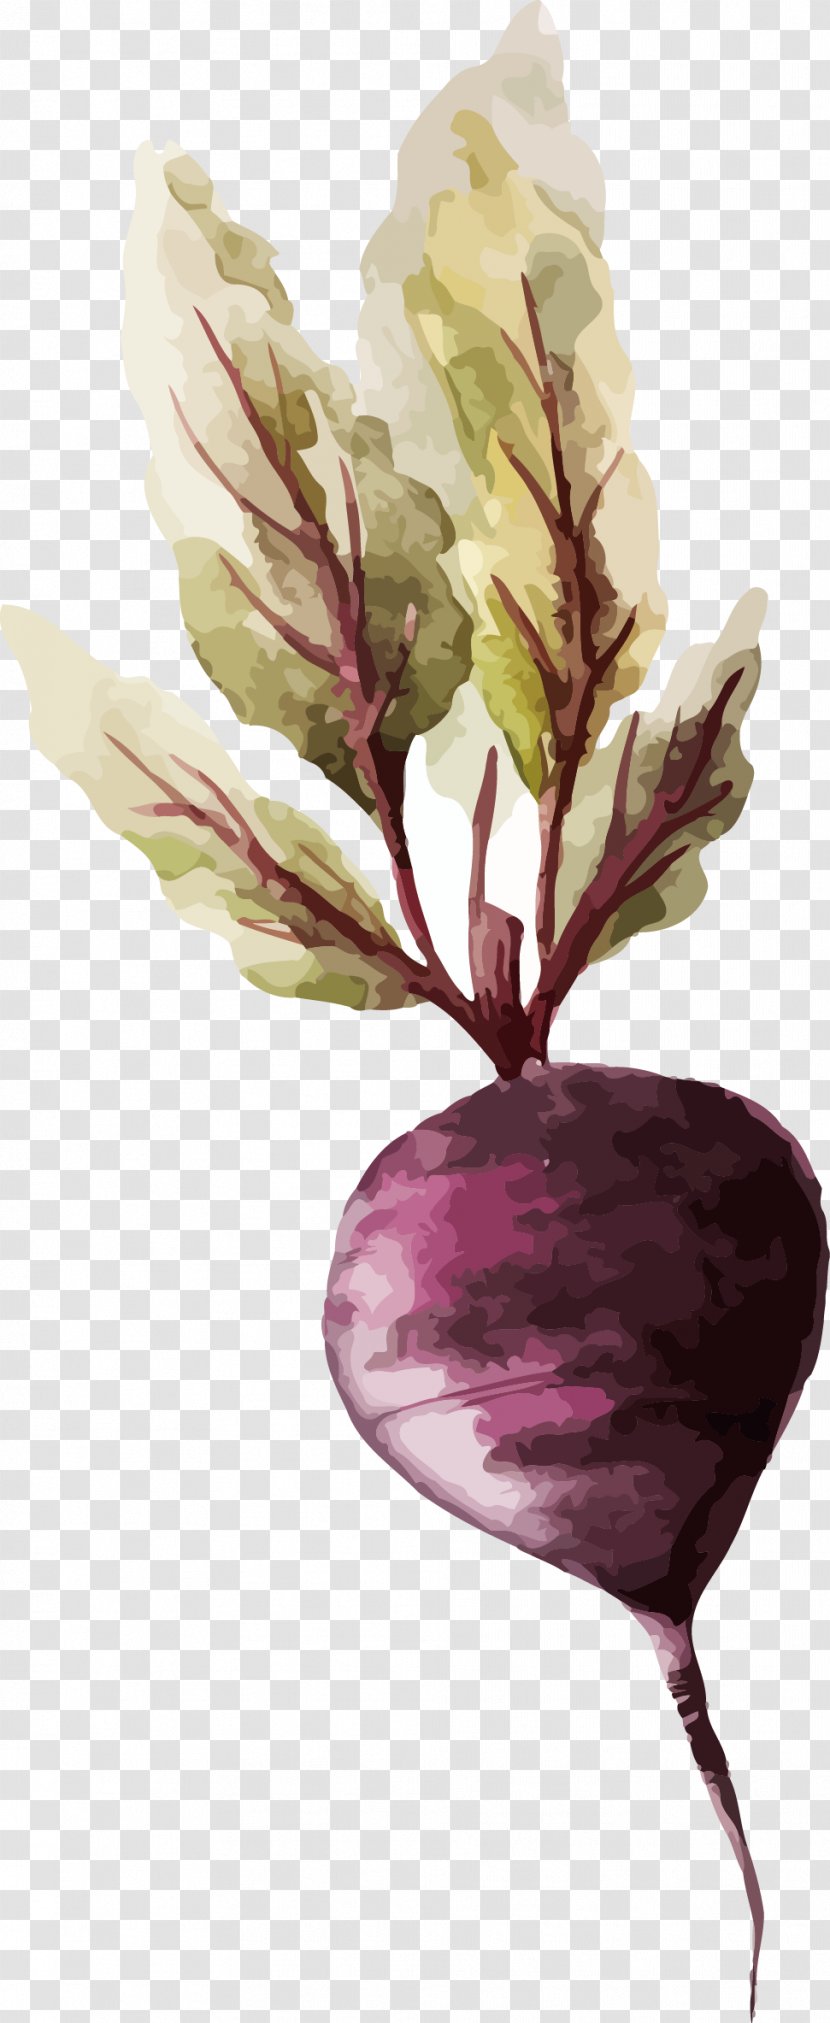 Watercolor Painting Vegetable Drawing Illustration - Root Vegetables - Carrot Transparent PNG